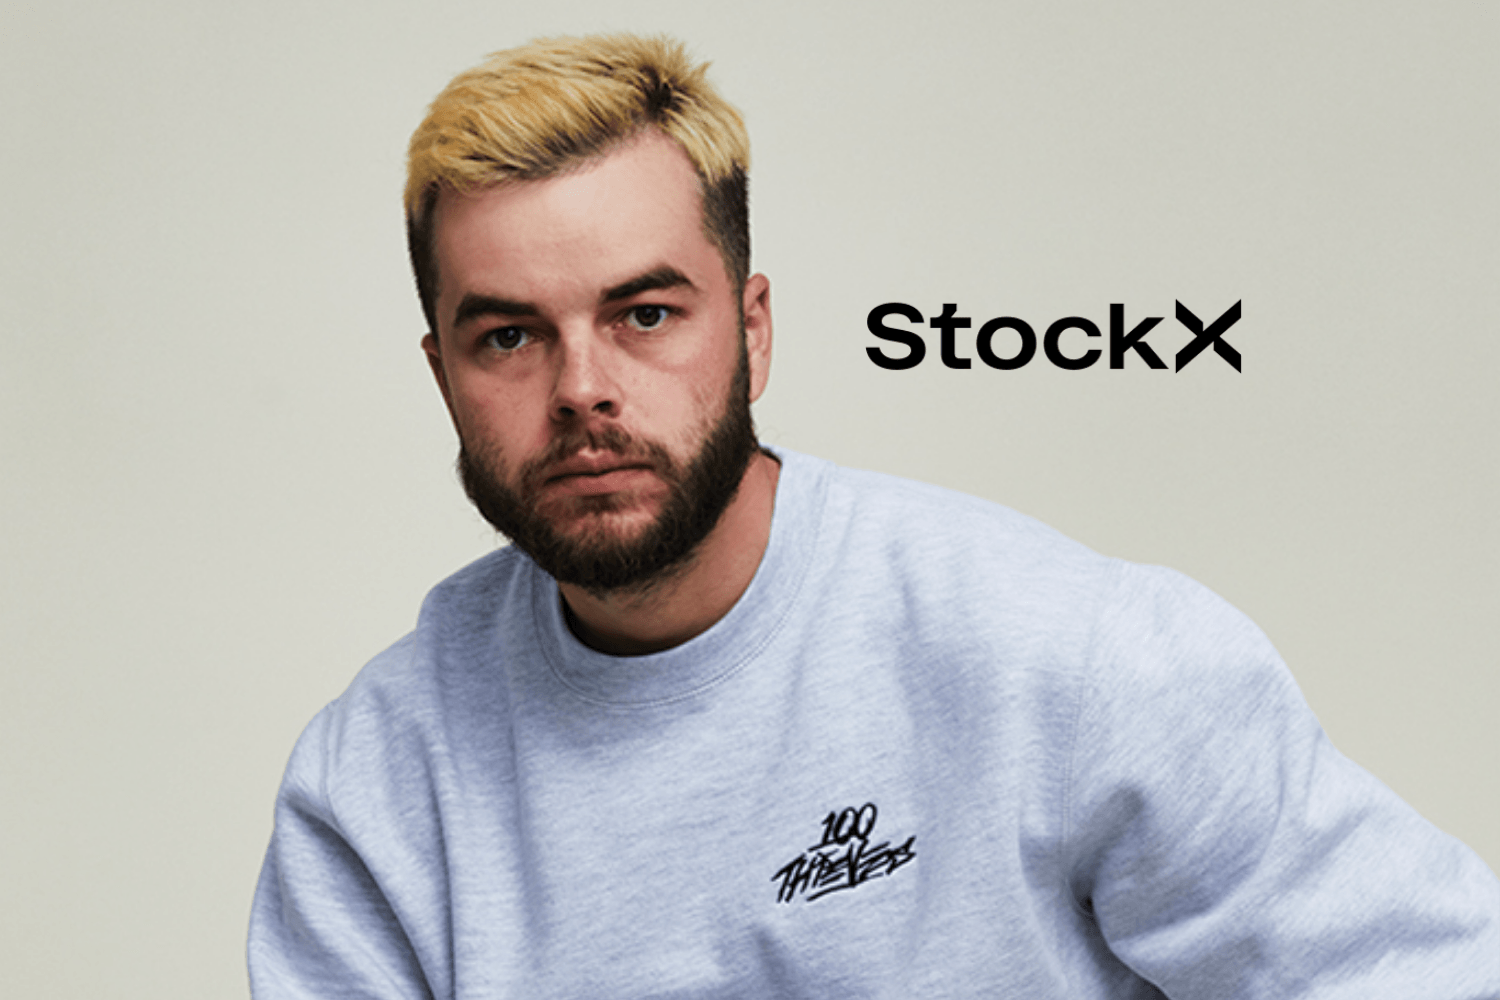 The Holiday Gift Guide of 100 Thieves at StockX